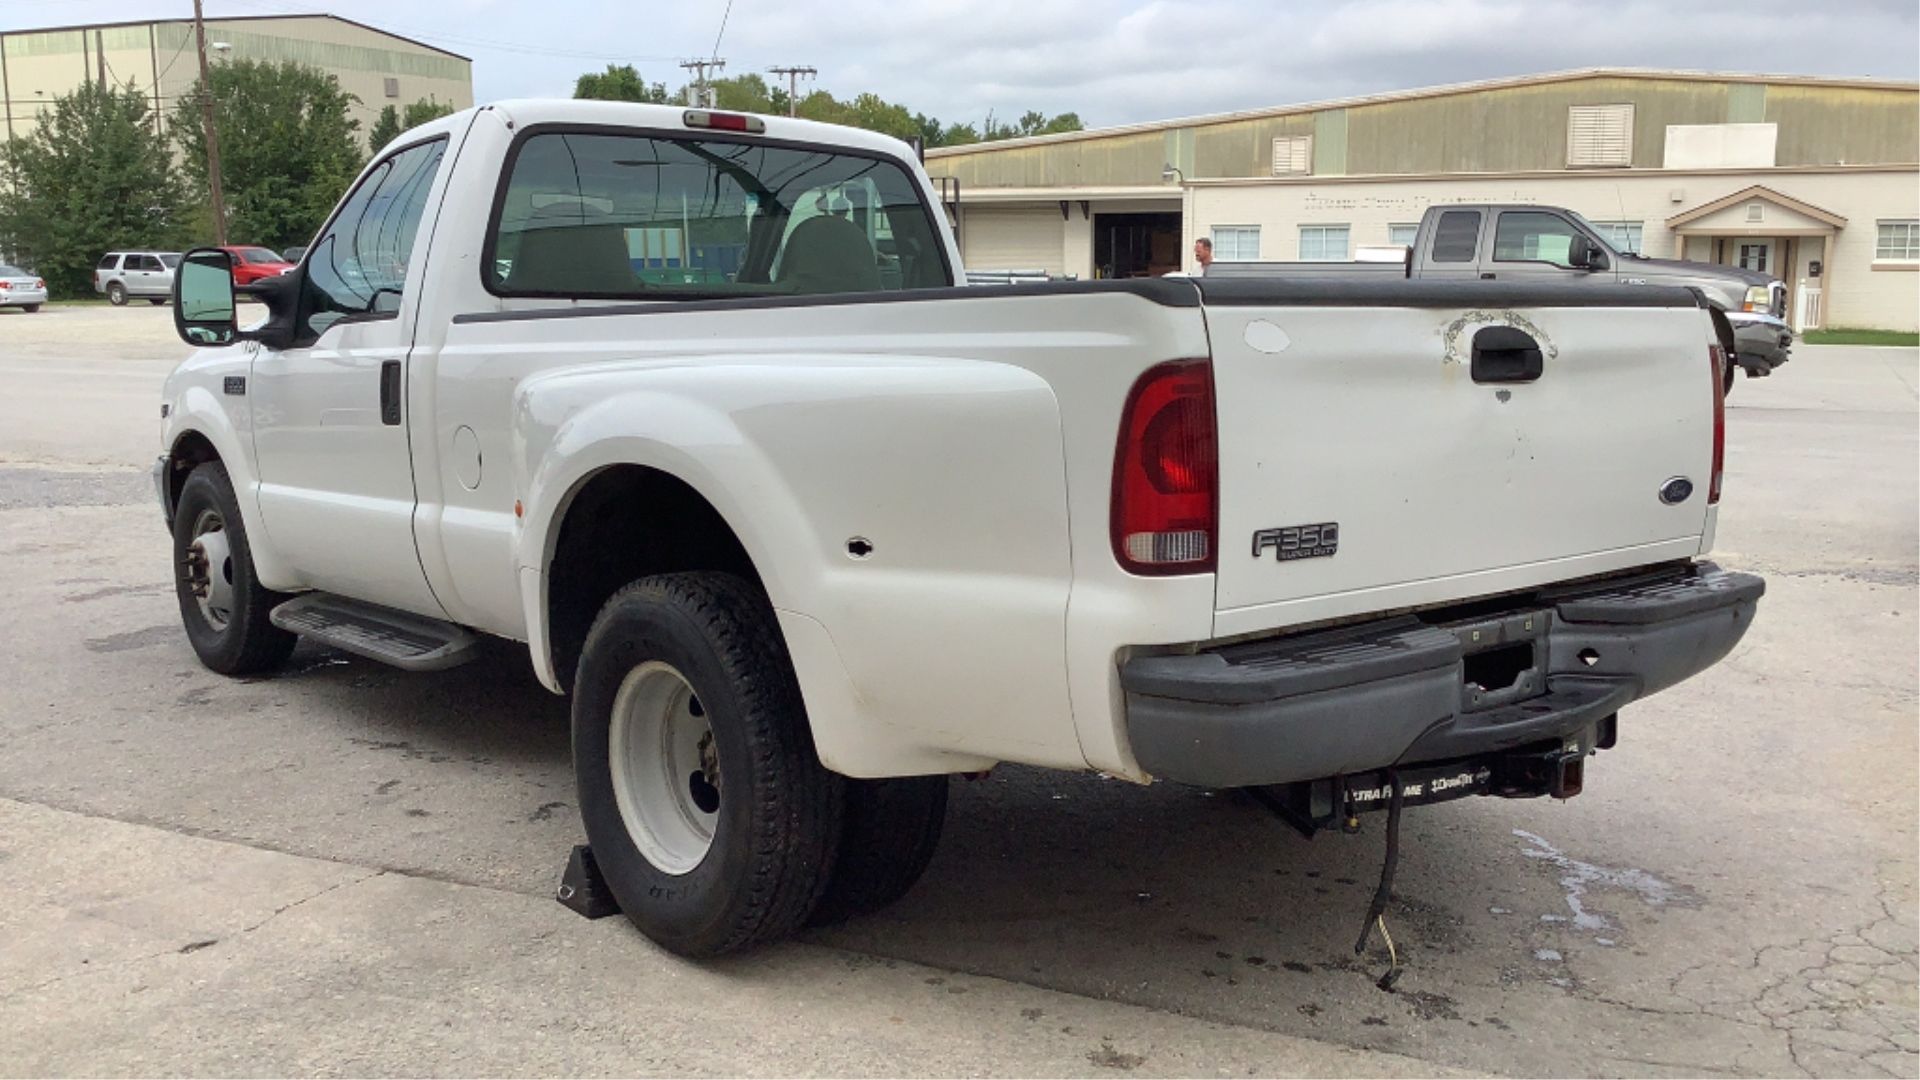 2002 Ford F-350 Regular Cab Dually 2WD - Image 12 of 89